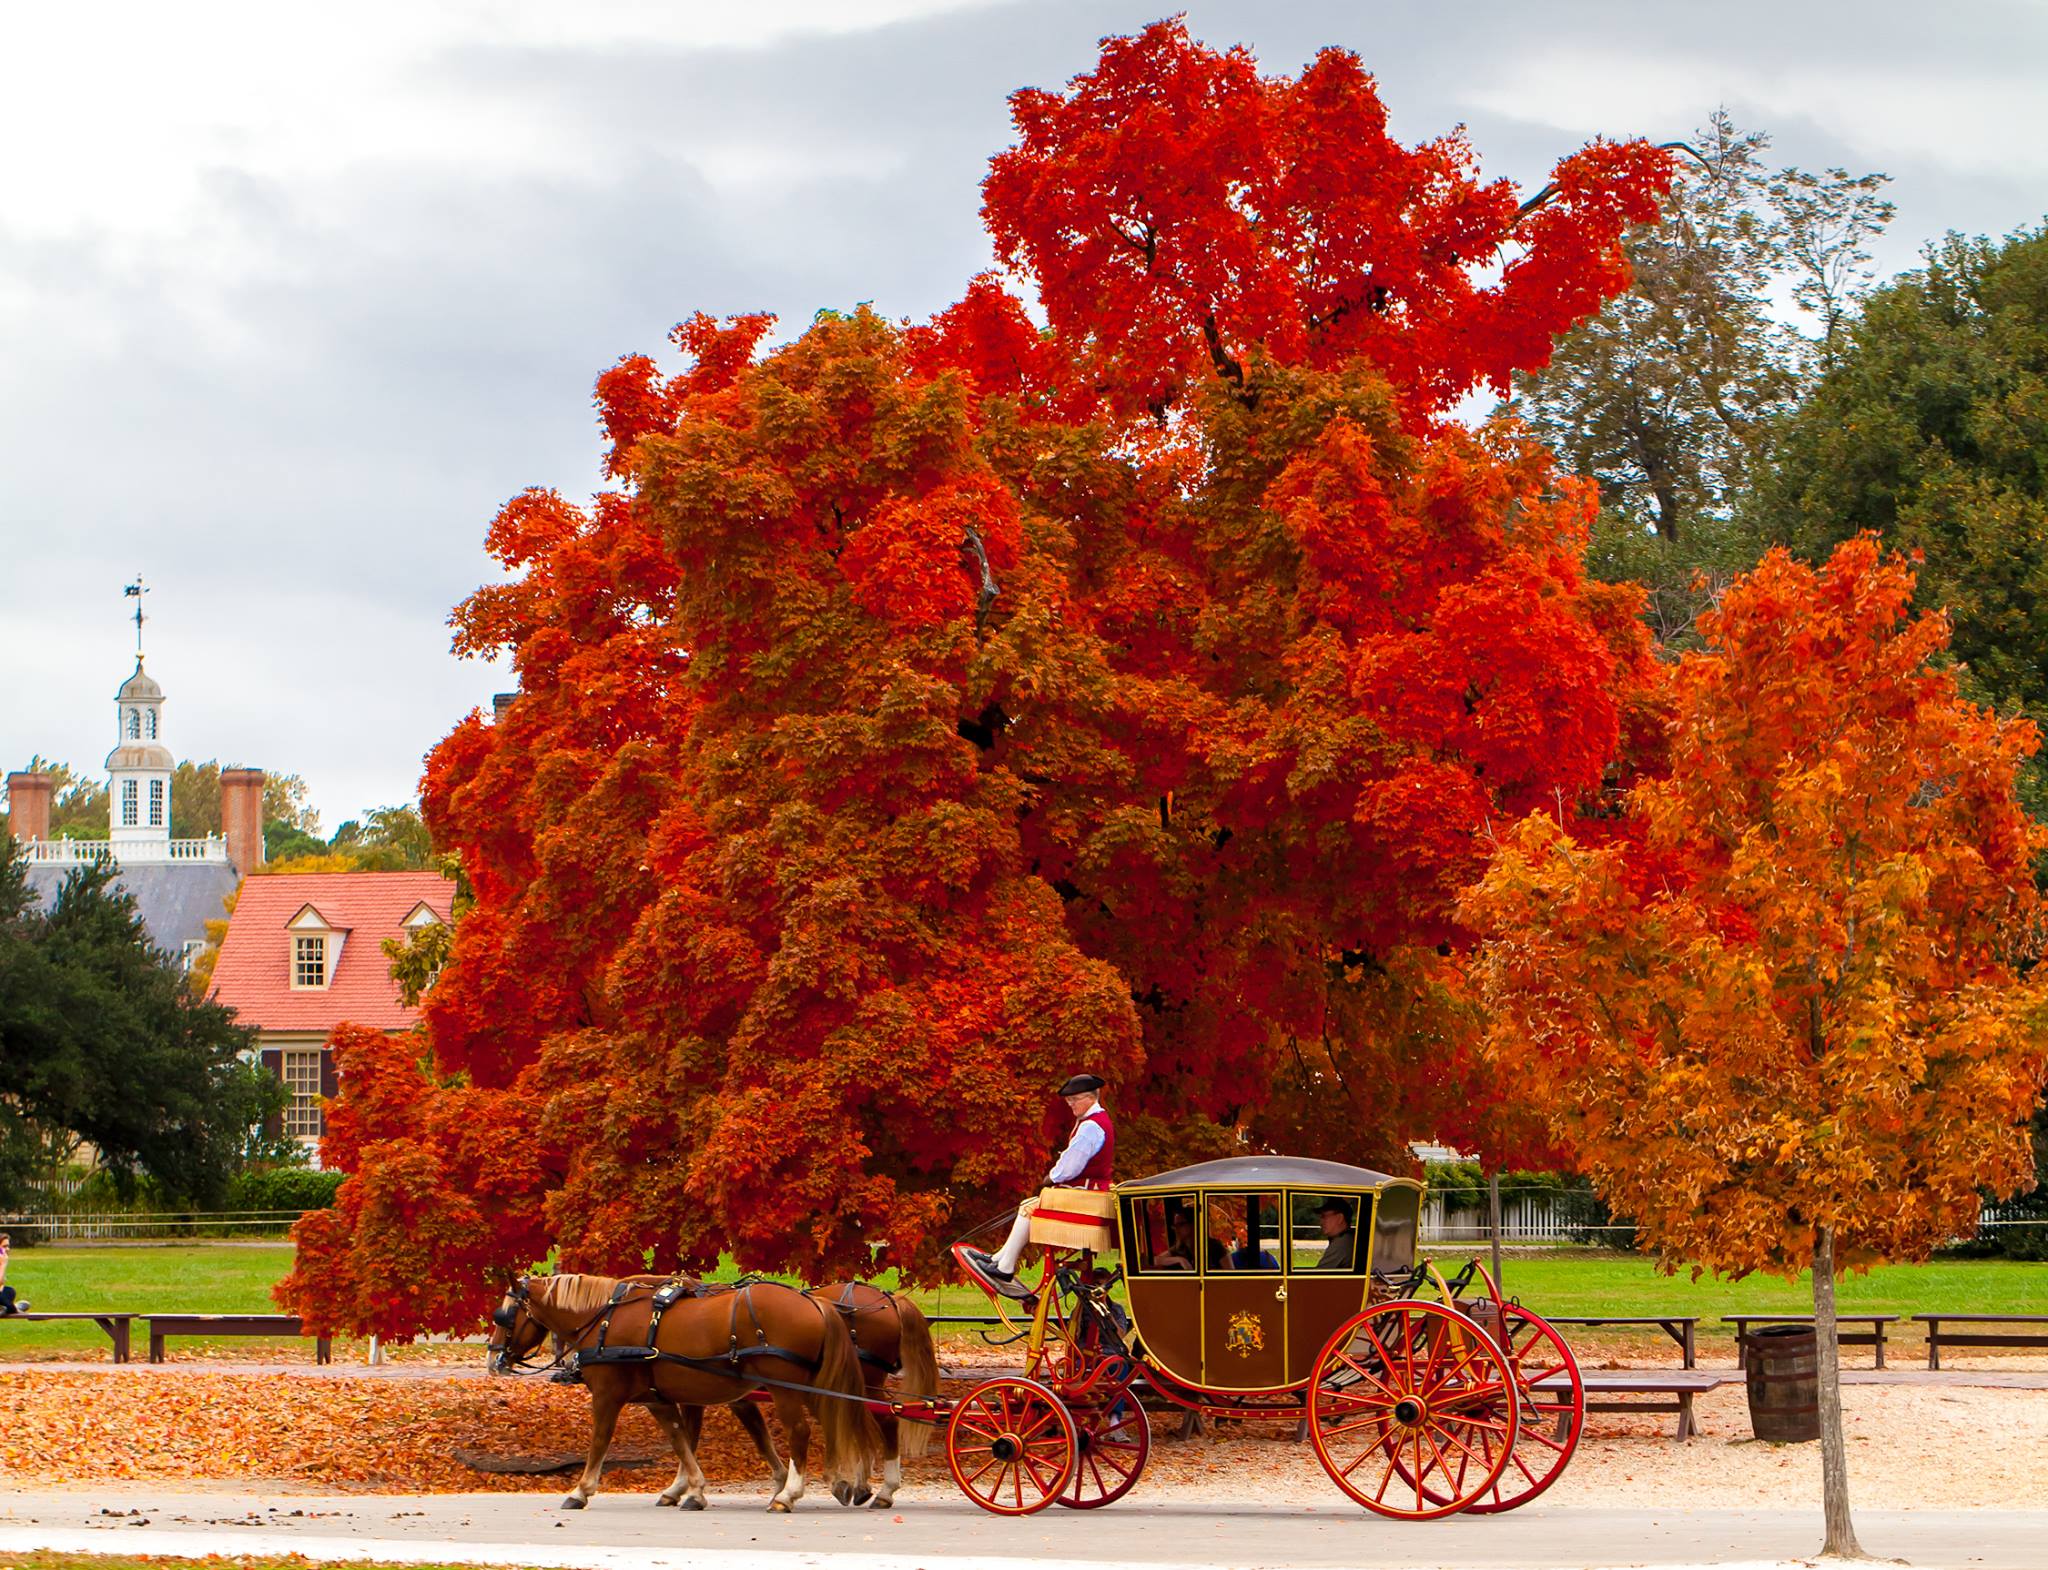 Photo Essay: Autumn in Colonial Williamsburg | Making History